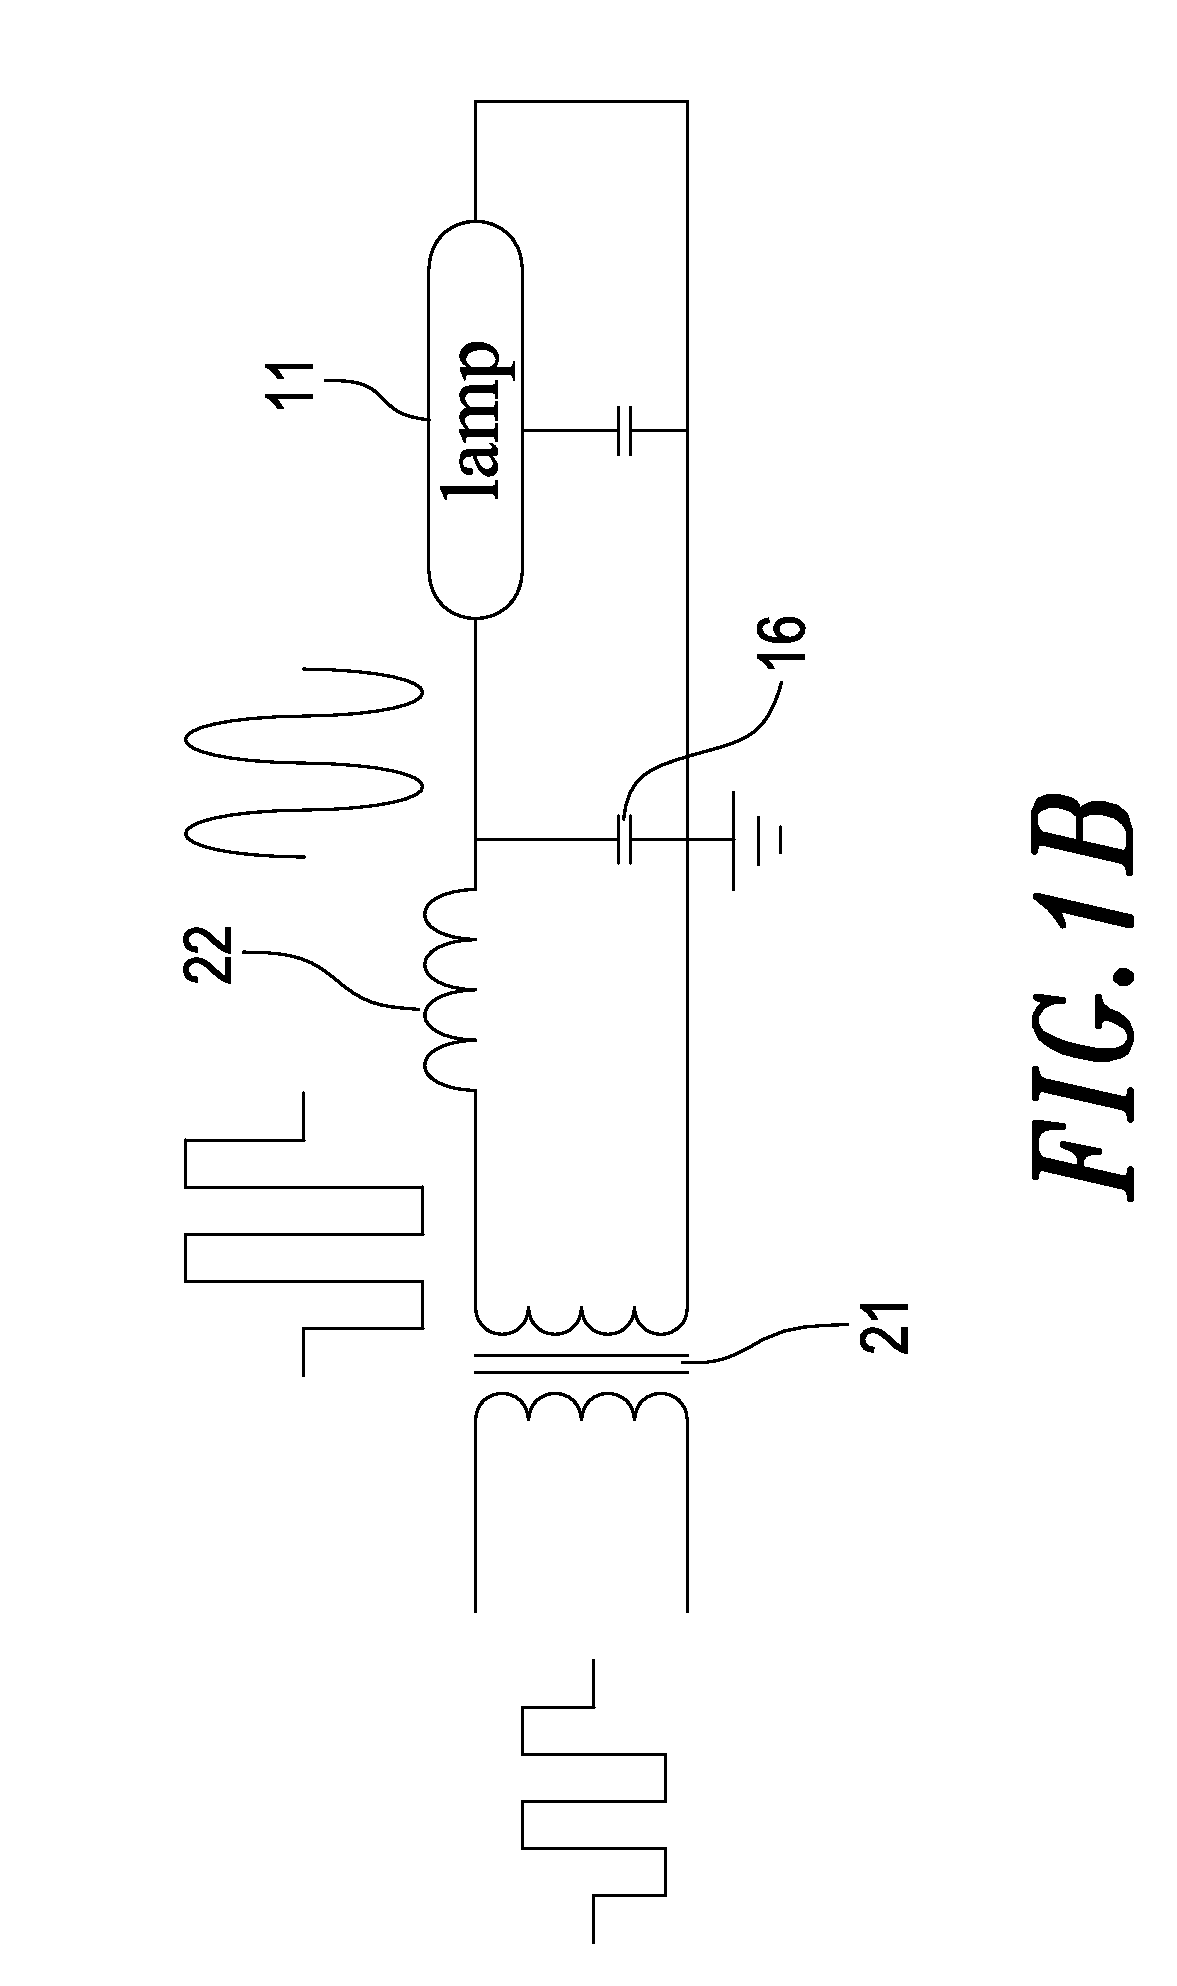 Coupled lamp driving device